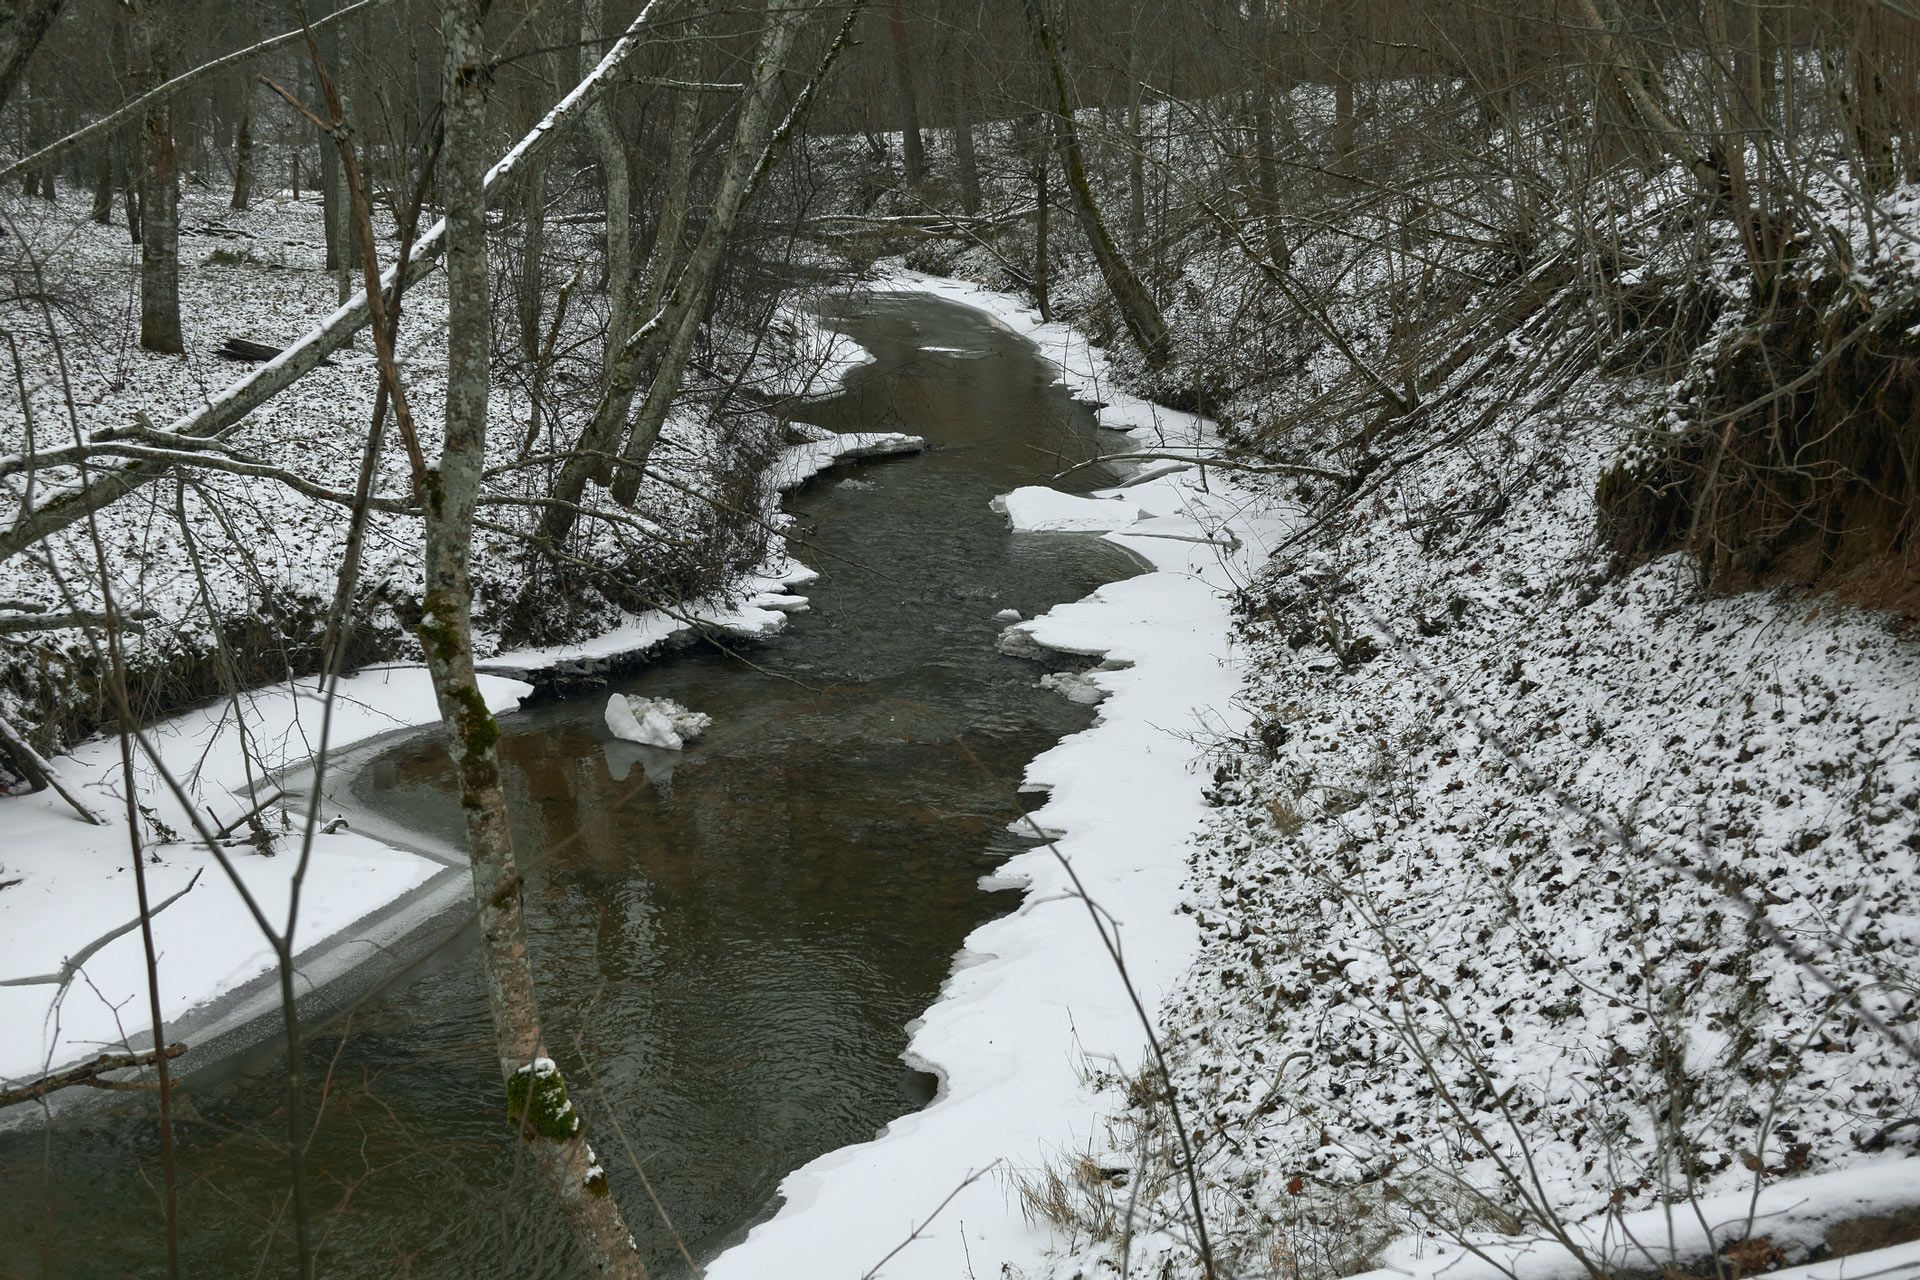 A Forest River — Man in White Helmet in Holmes, PA